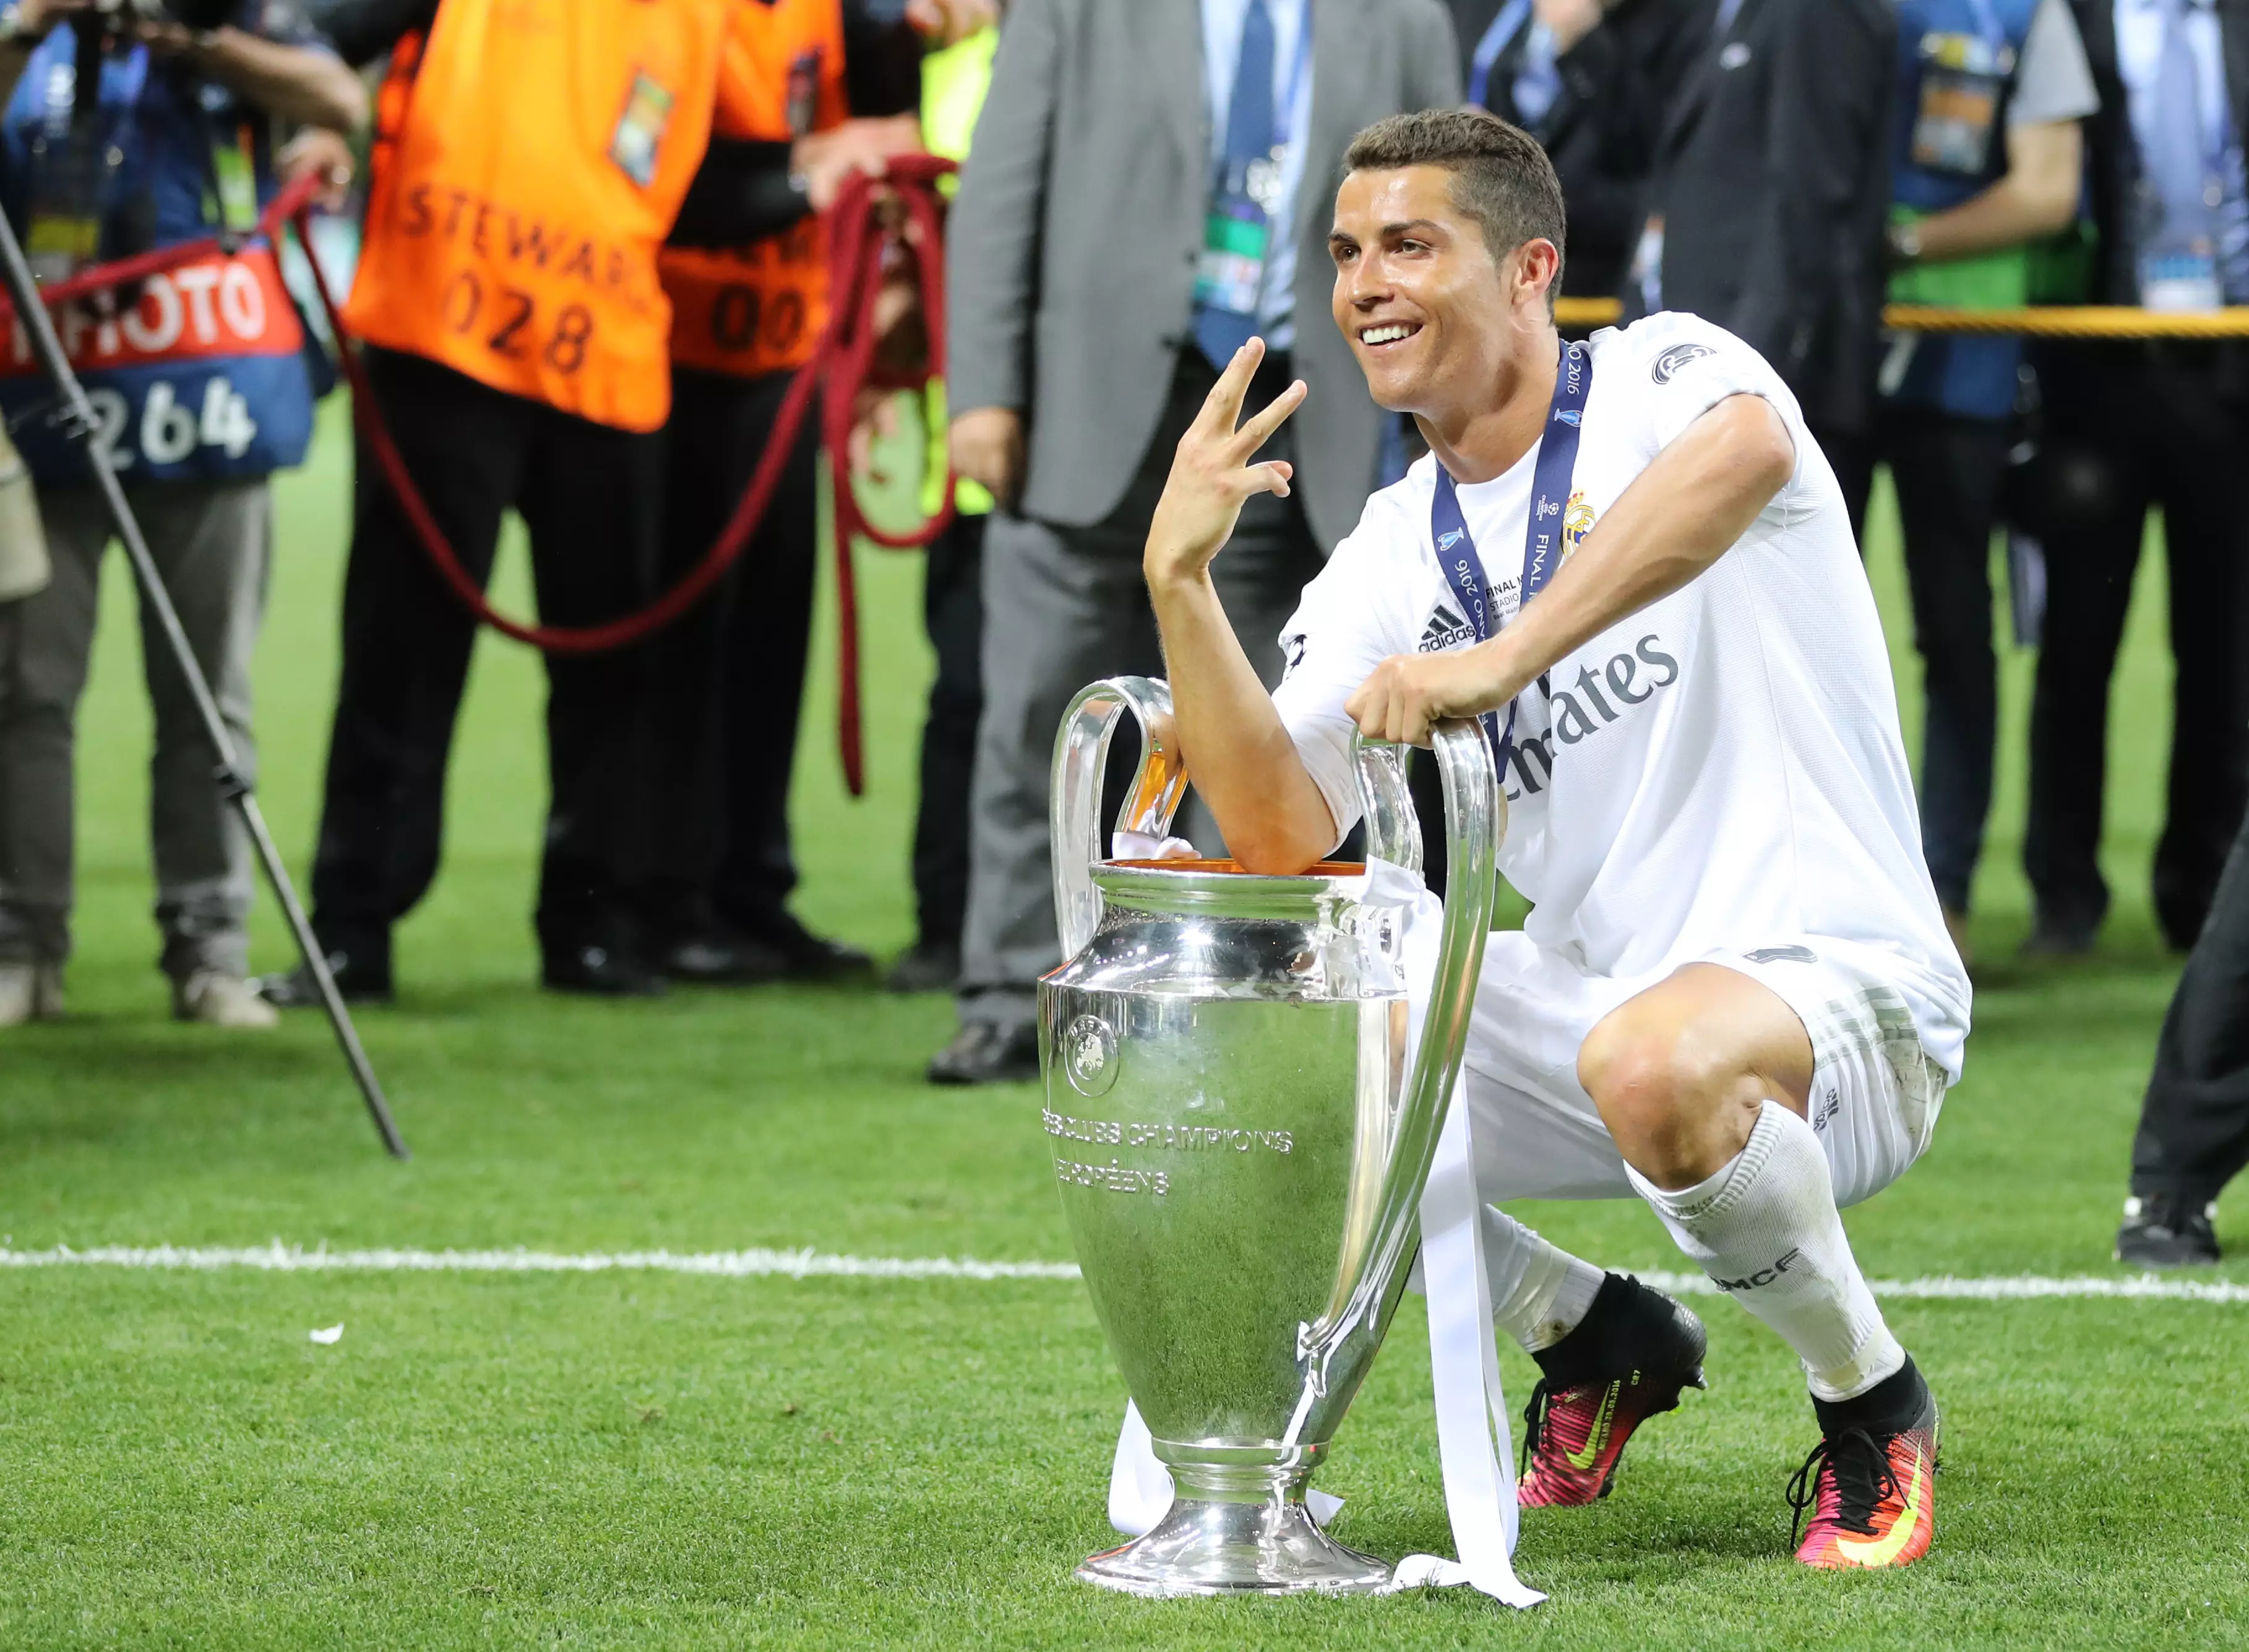 Ronaldo is set to win his sixth European title with his third team. Image: PA Images